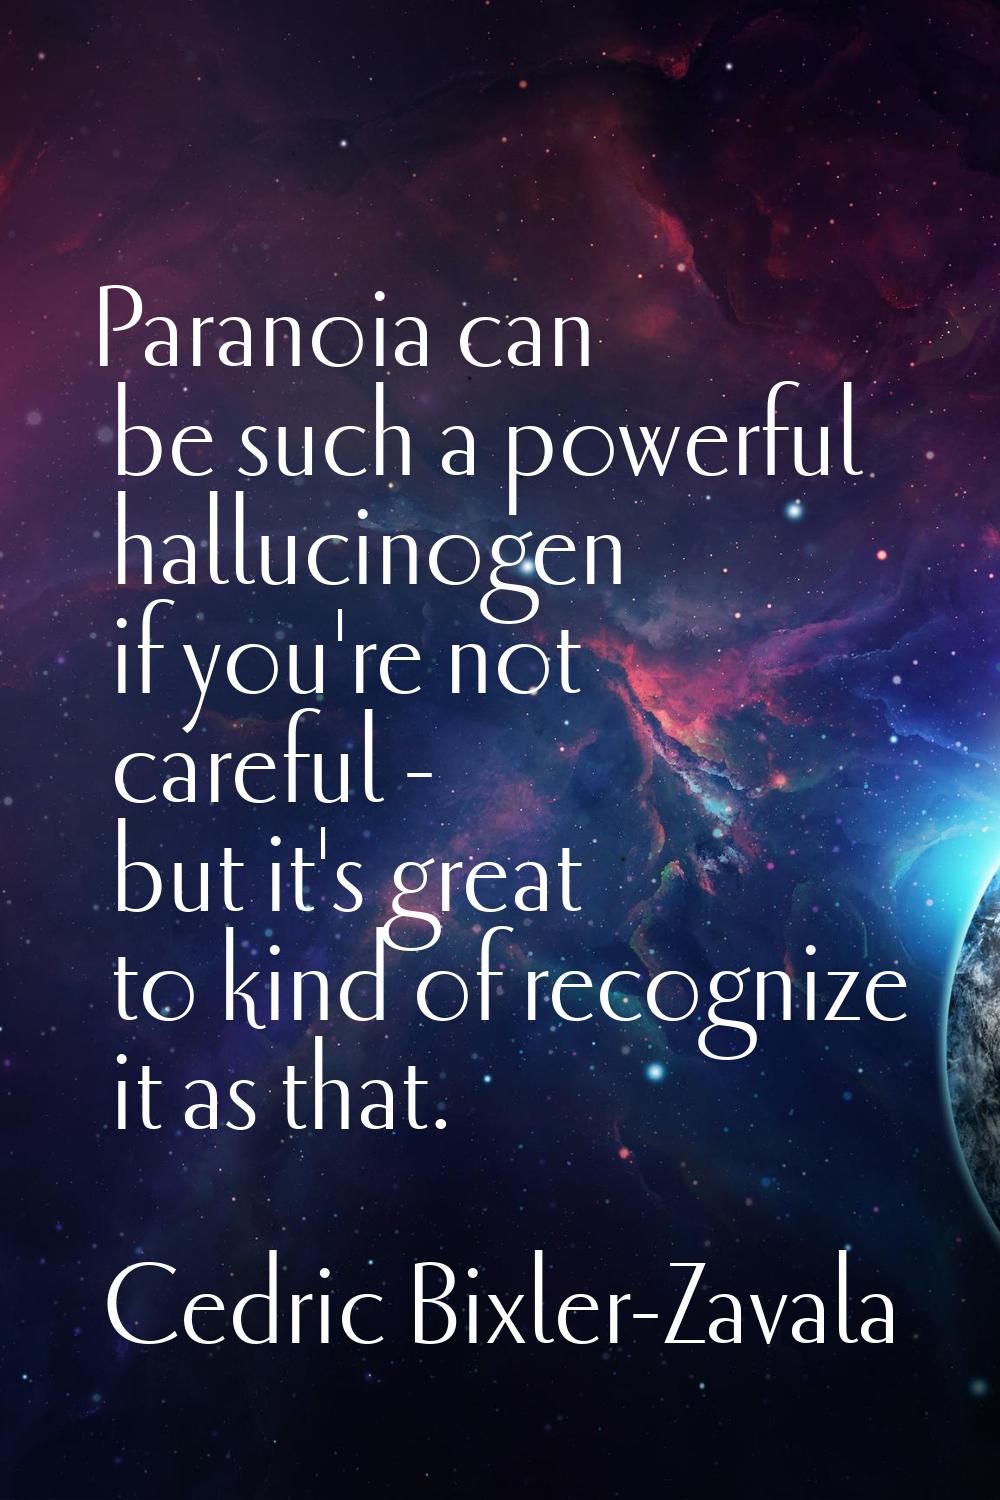 Paranoia can be such a powerful hallucinogen if you're not careful - but it's great to kind of reco